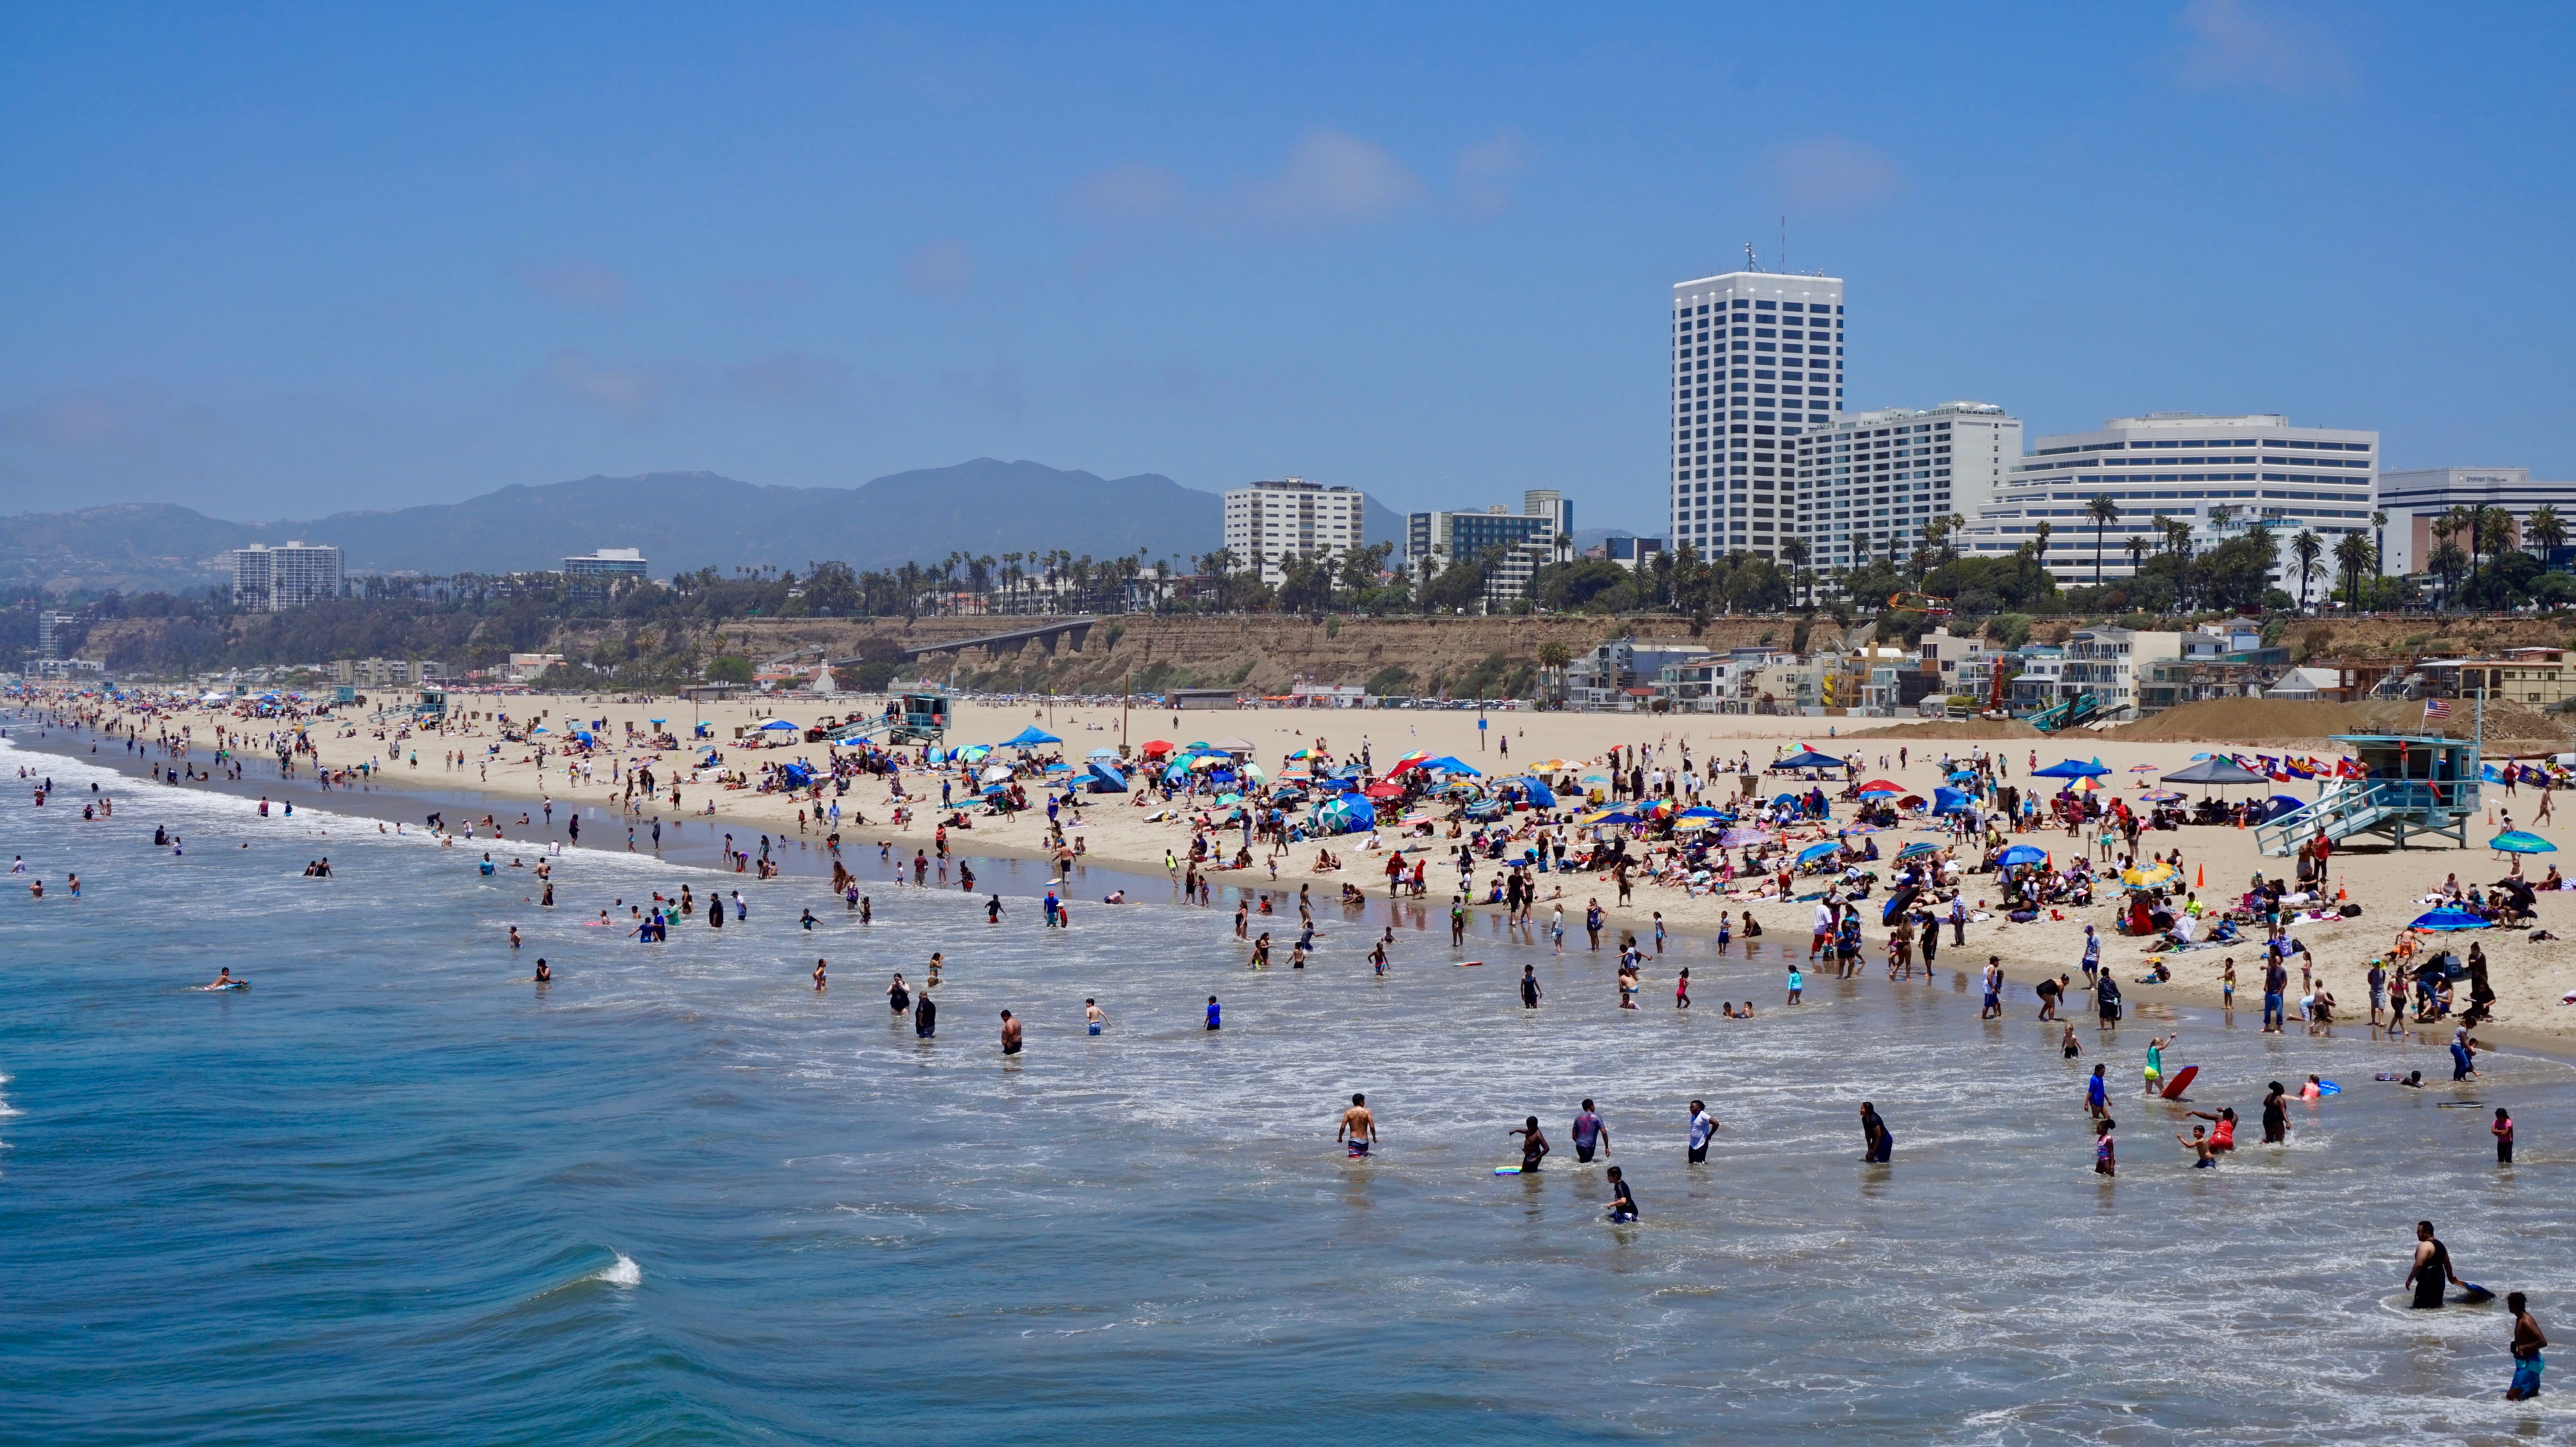 View of Santa Monica from the Pier